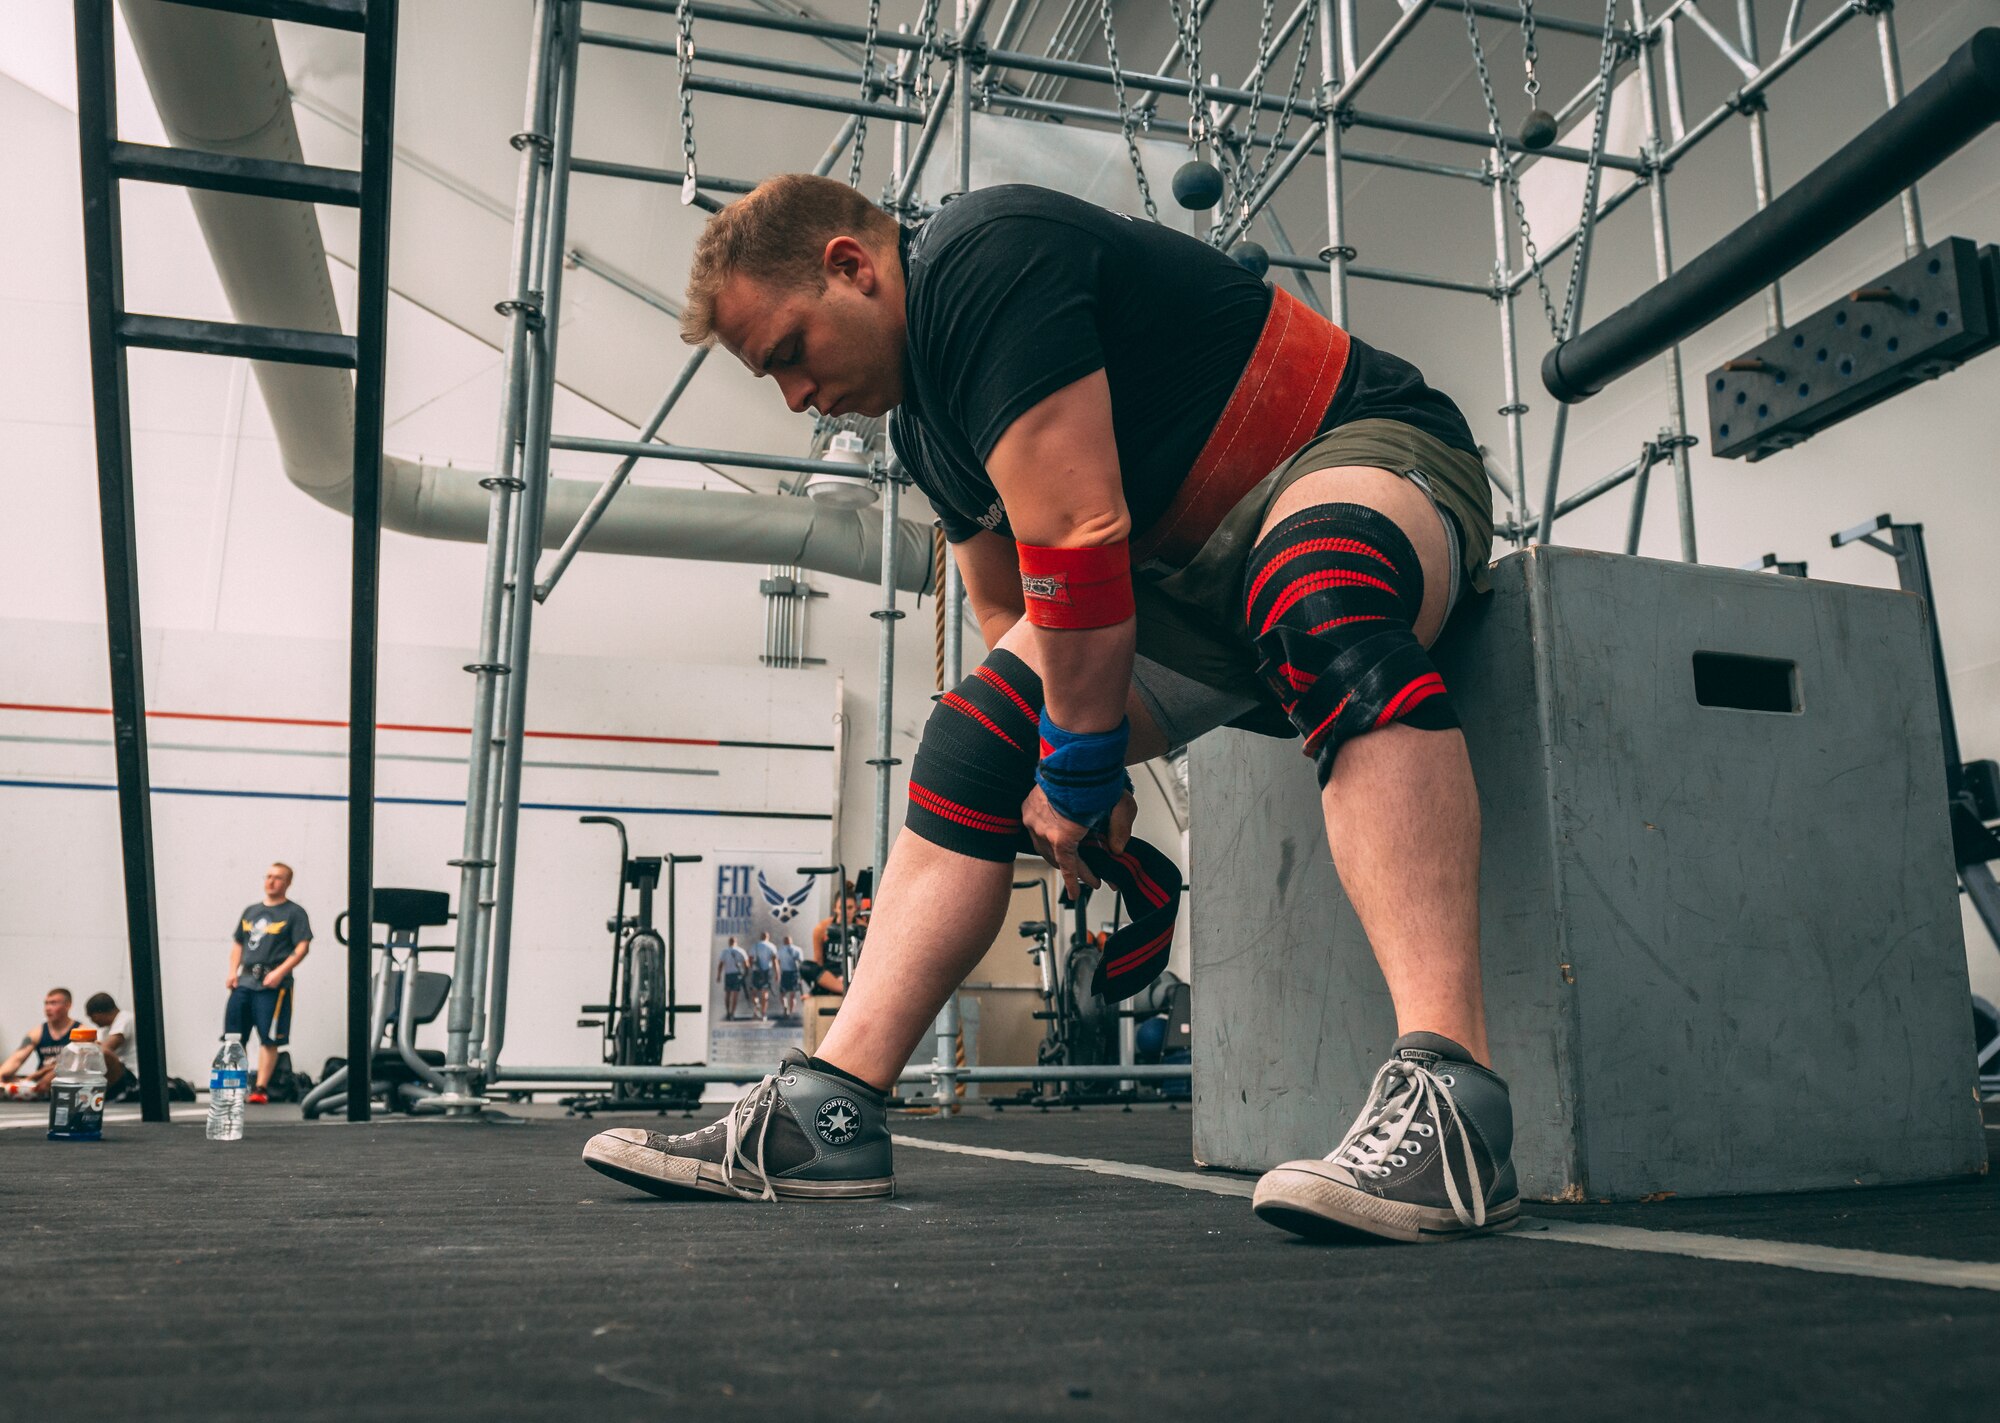 Josh Canterberry, powerlifting competitor, wraps his knee with support wraps before competing in the Luke Air Force Base Powerlifting Competition at Luke AFB, Ariz., May 18, 2018. Sixteen Thunderbolts competed to see who could lift the most weight and complete the highest repetitions of three workouts. (U.S. Air Force photo by Airman 1st Class Alexander Cook)